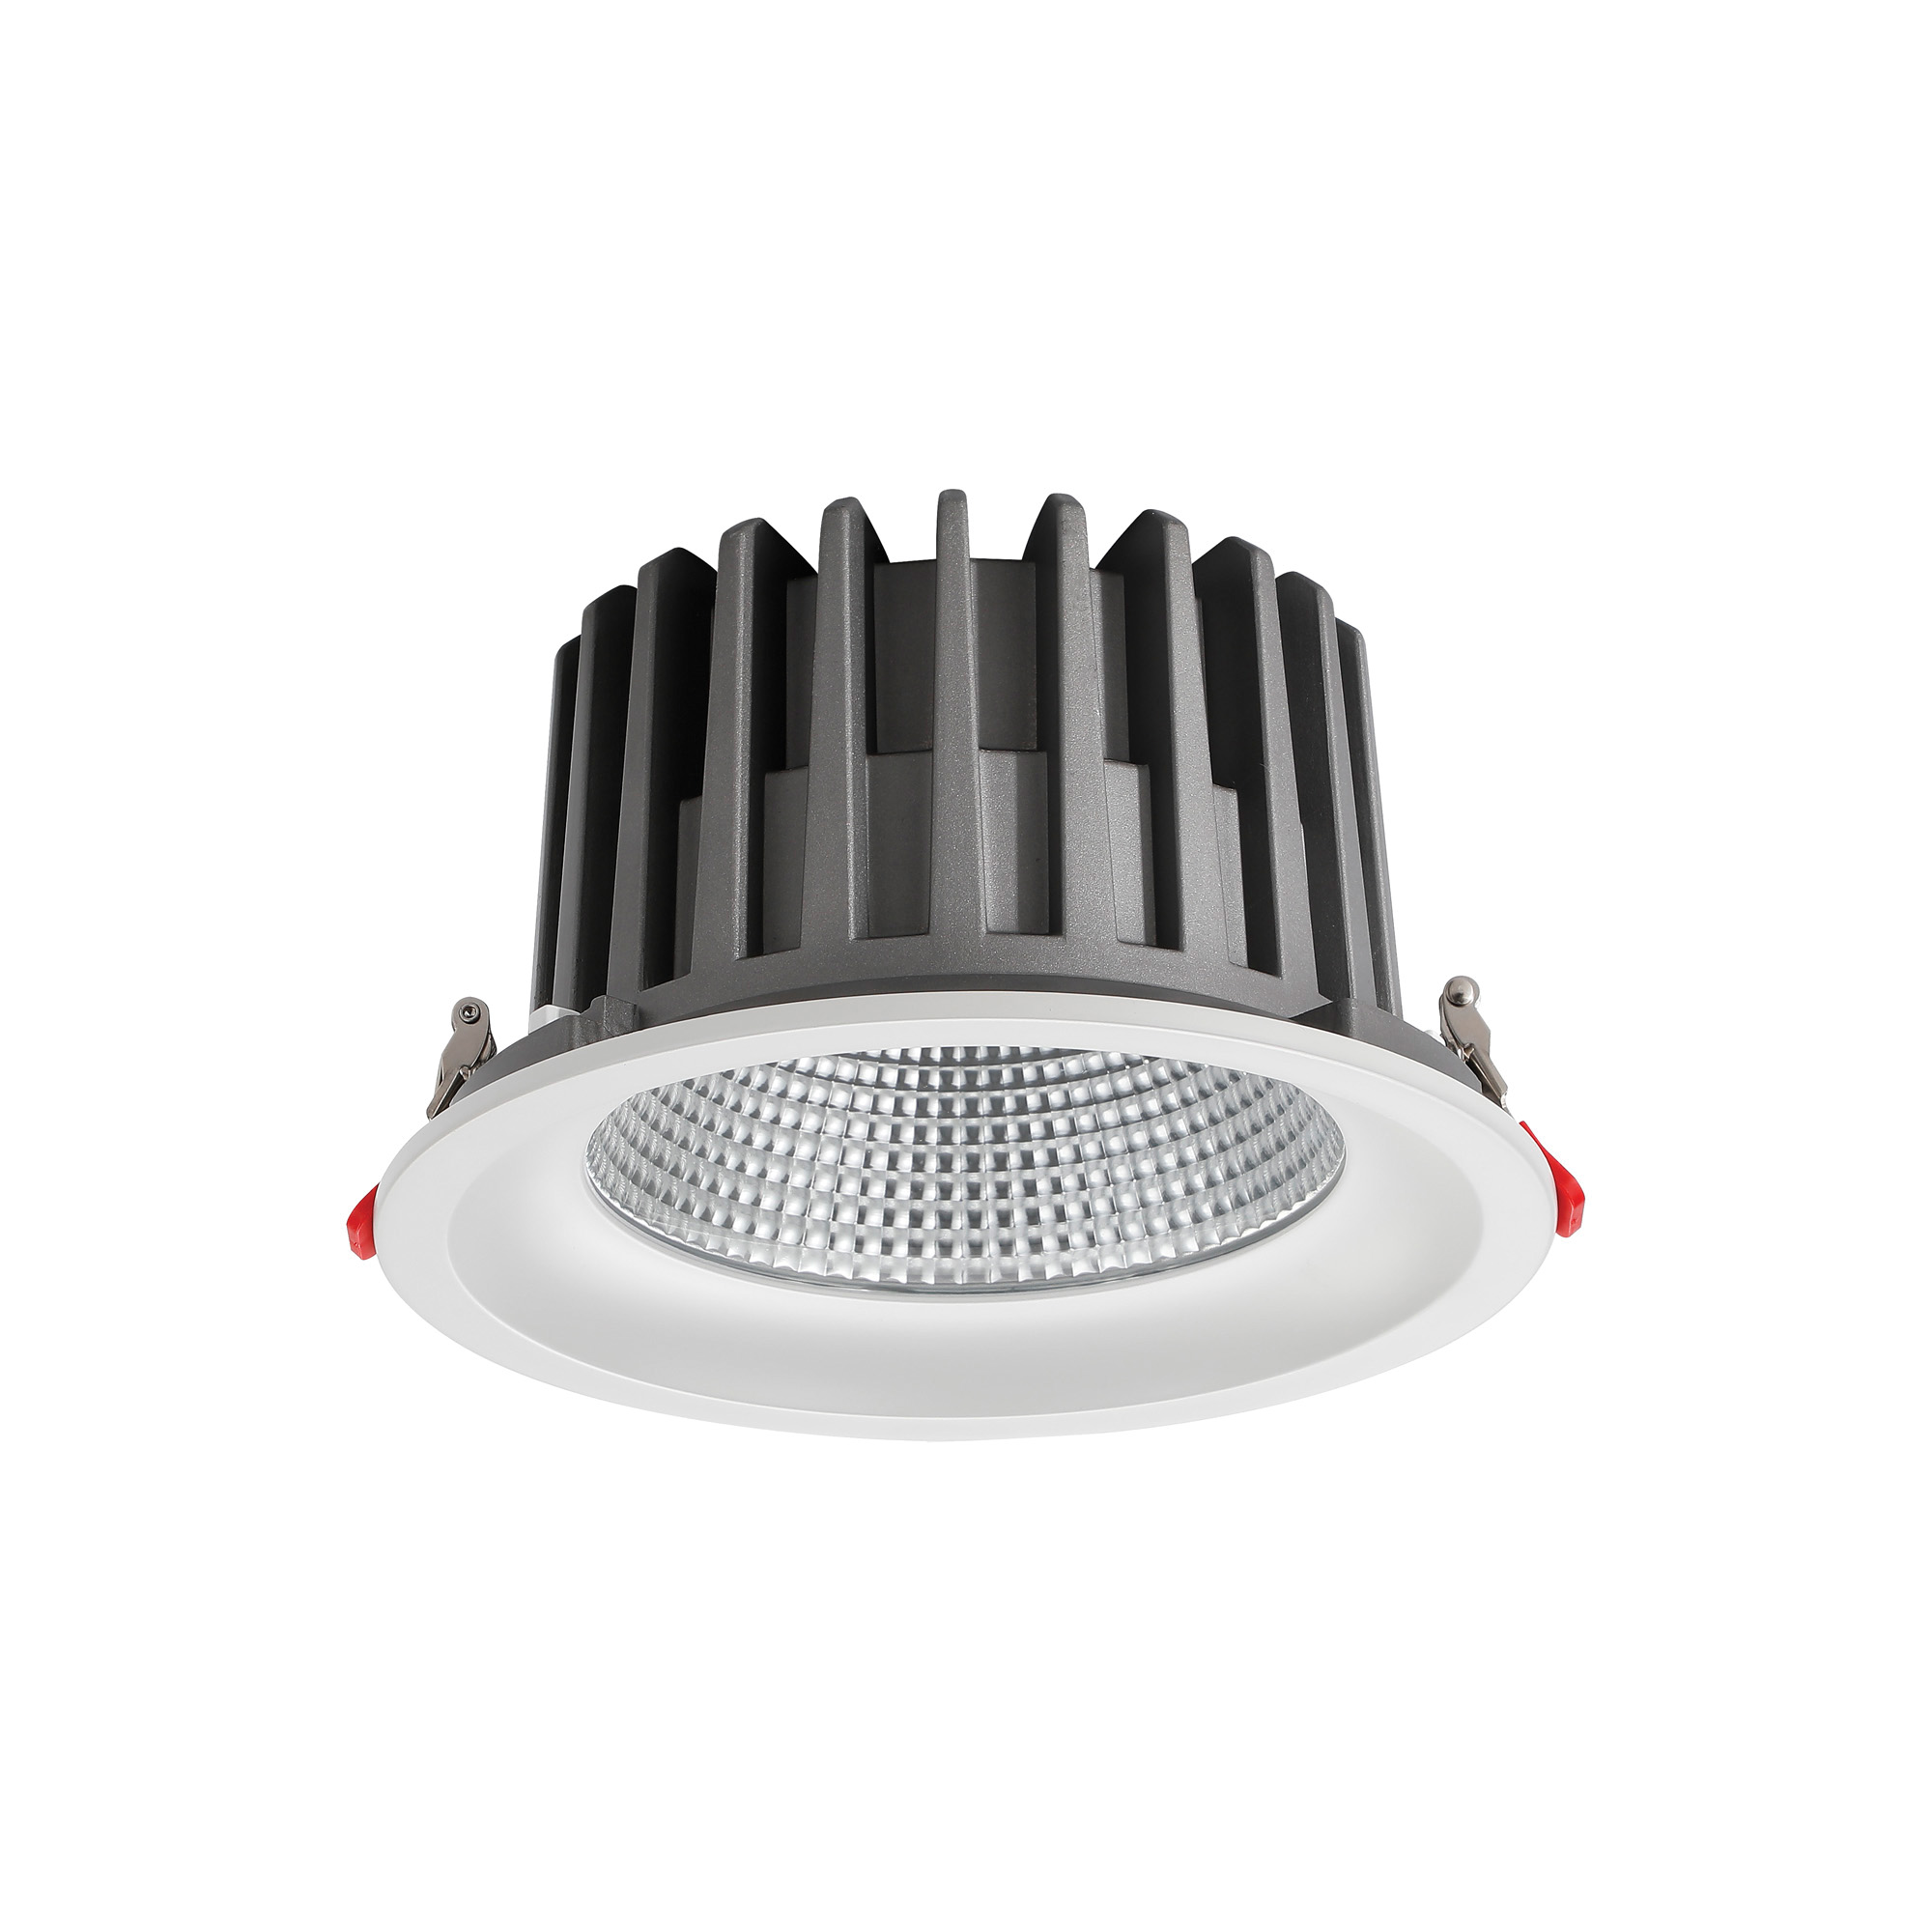 DL200068  Bionic 50, 50W, 1200mA, White Deep Round Recessed Downlight, 4400lm ,Cut Out 175mm, 50° , 4000K, IP44, DRIVER INC., 5yrs Warranty.